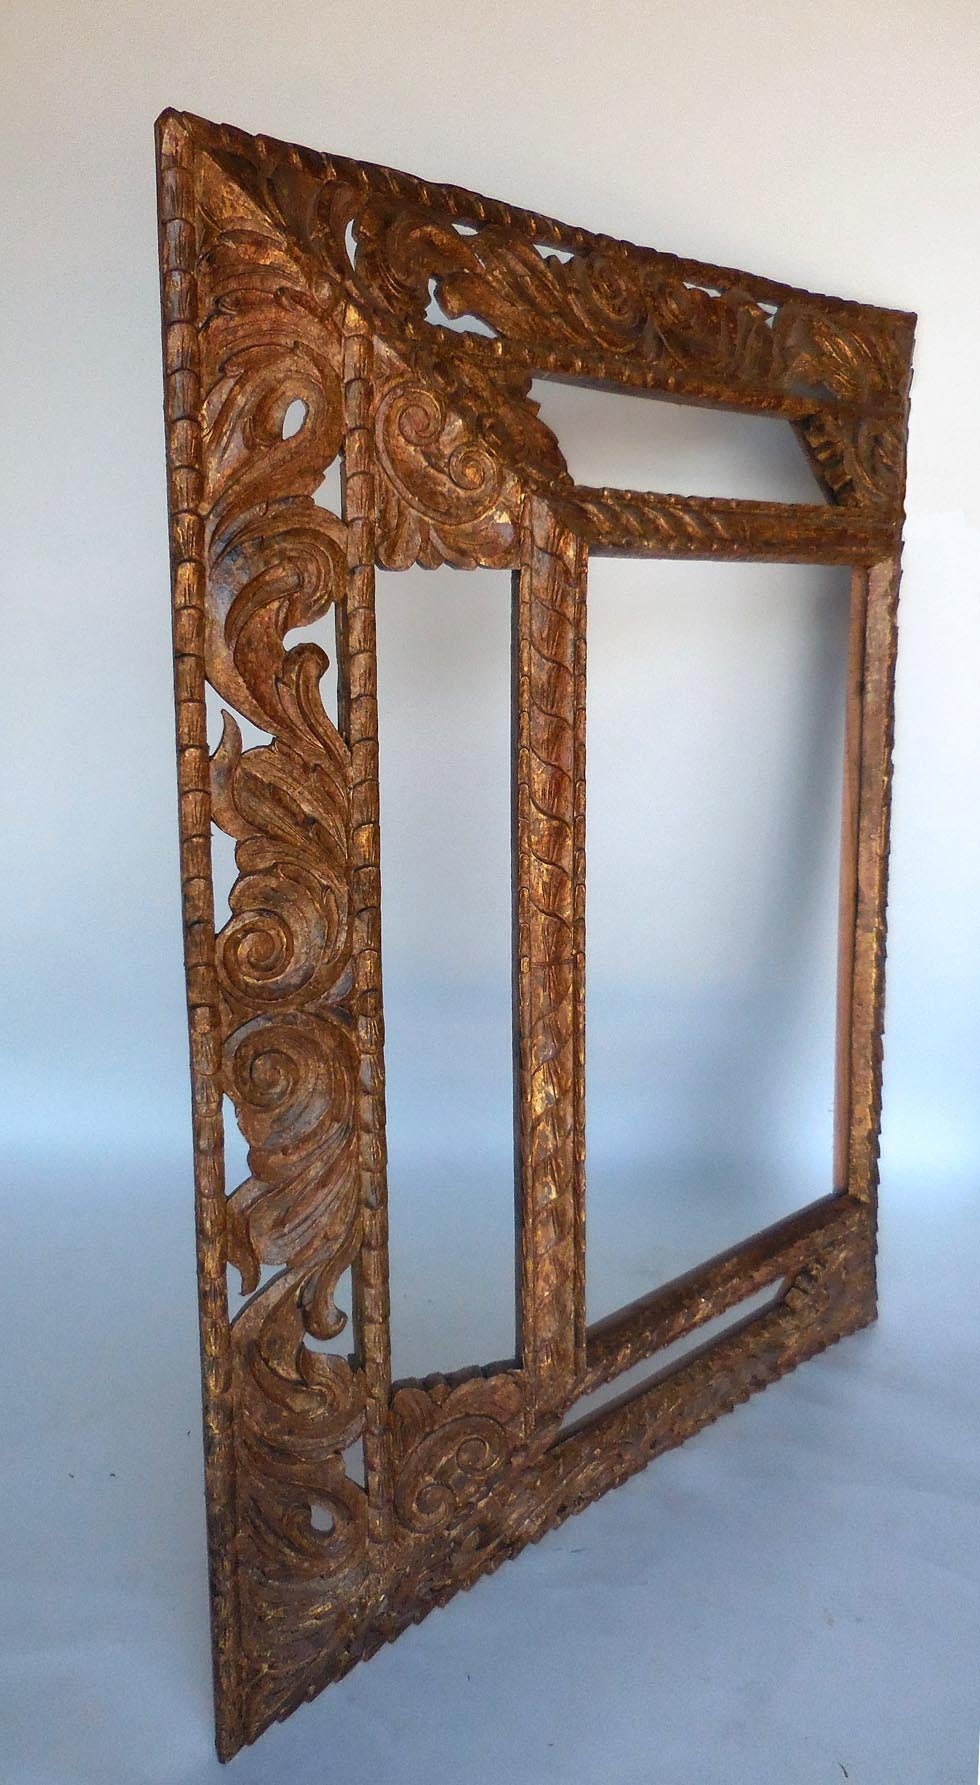 Pair of hand-carved and hand finished large scale mirrors. Five panels. Beautiful and elegant hand-carved hardwood. Lovely warm gold finish. Pair available but priced and sold separately. Price includes clear mirror.